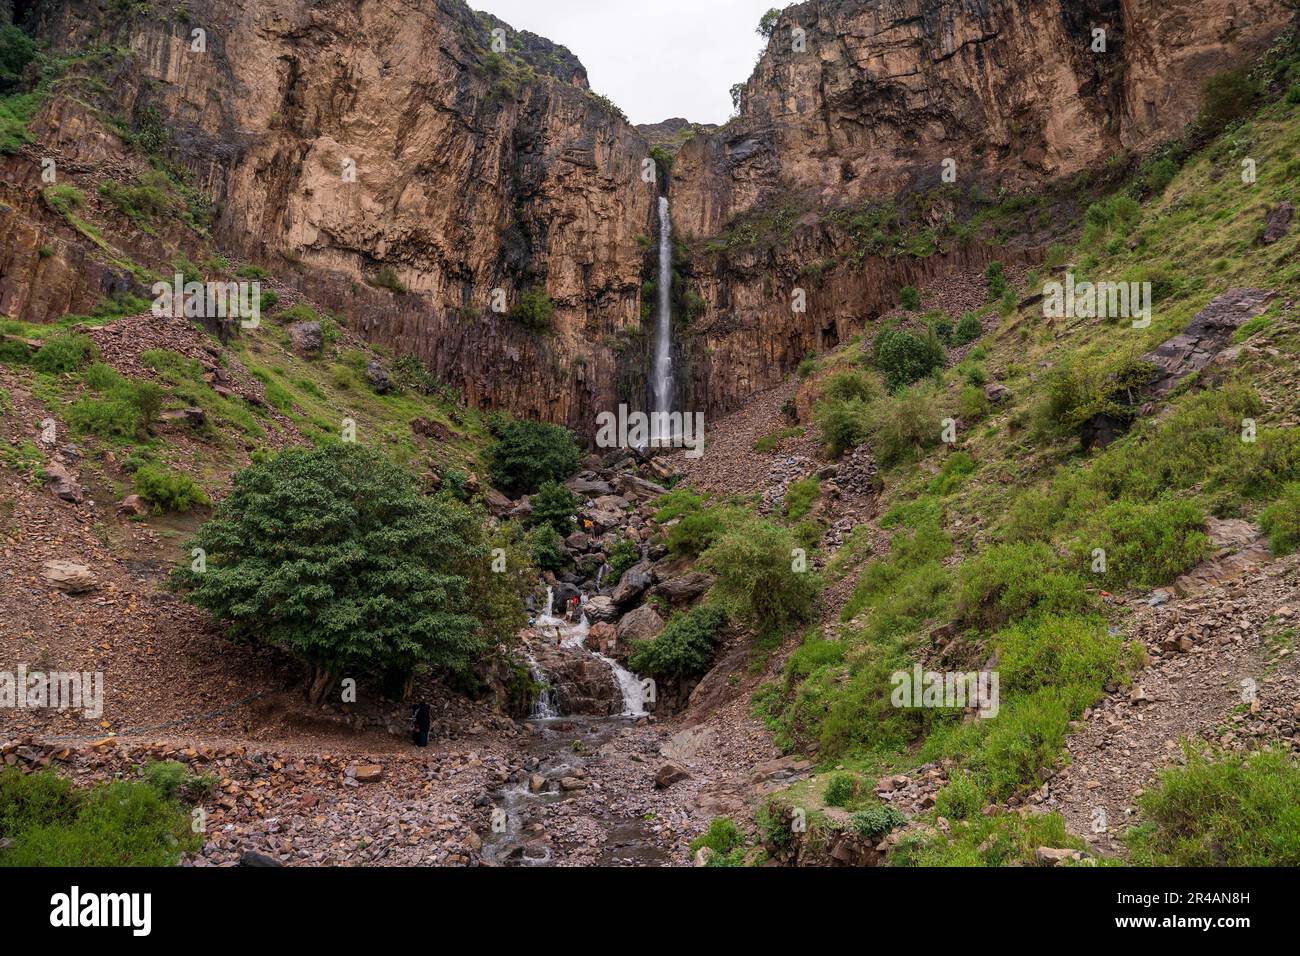 A stunning view of a majestic waterfall cascading between the rocky mountainscape in the city of Ibb, Yemen Stock Photo